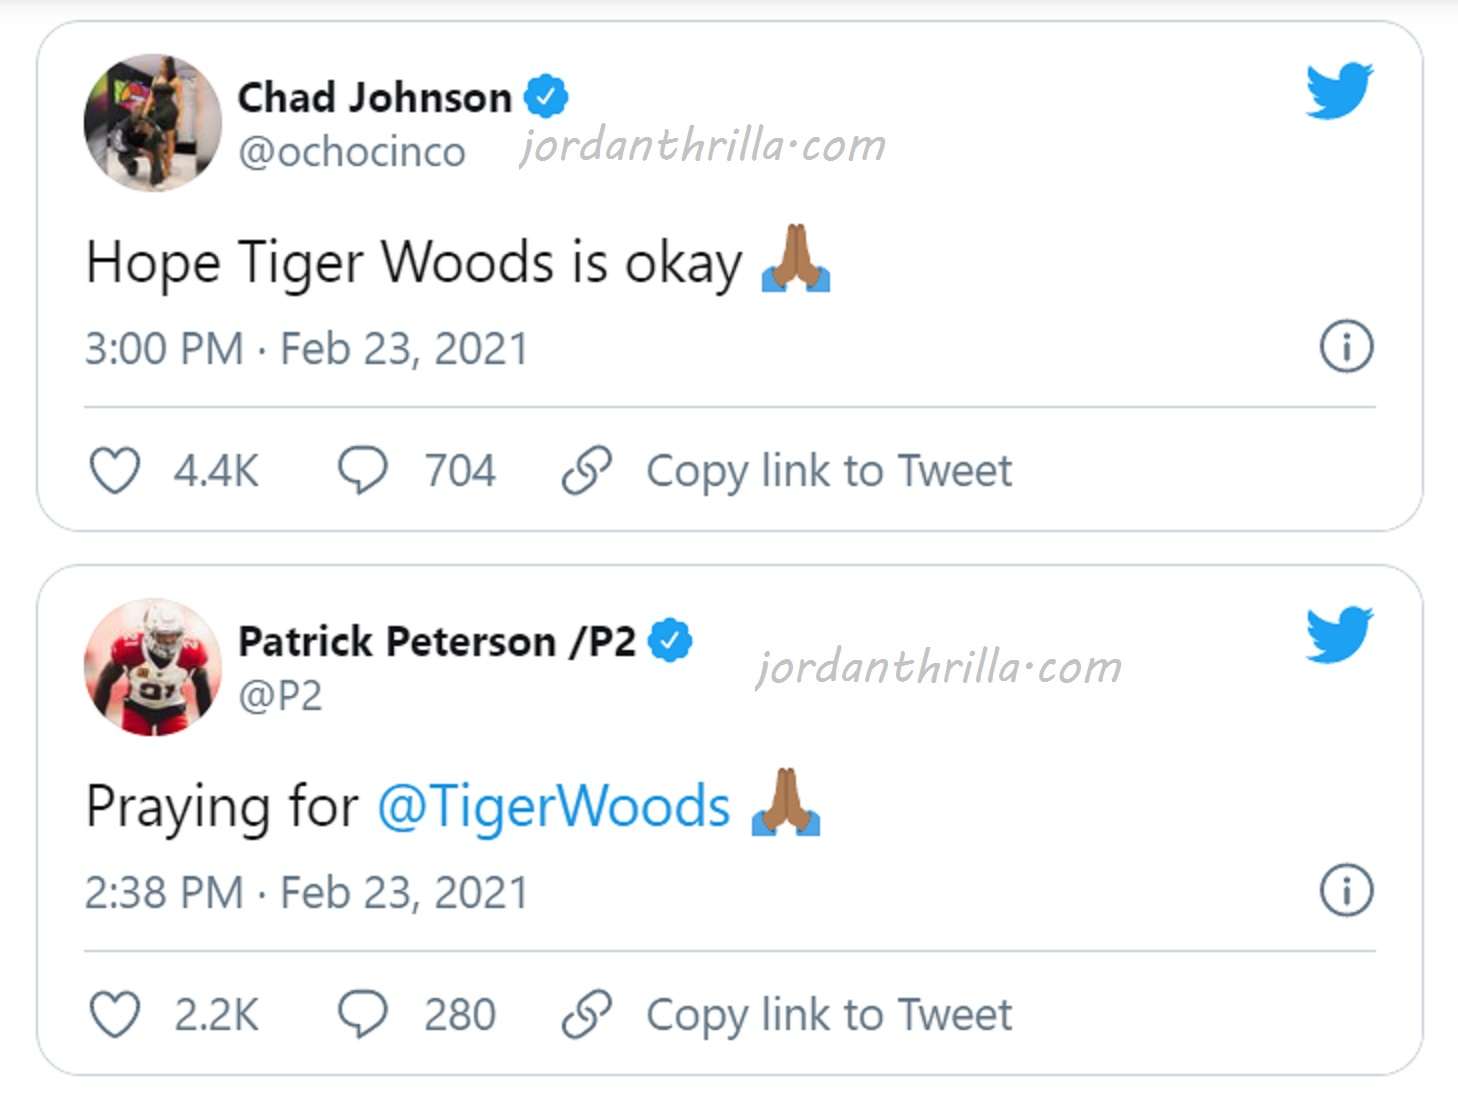 Chad Johnson and Patrick Peterson React to Tiger Woods Breaking Both Legs in Major Car Accident